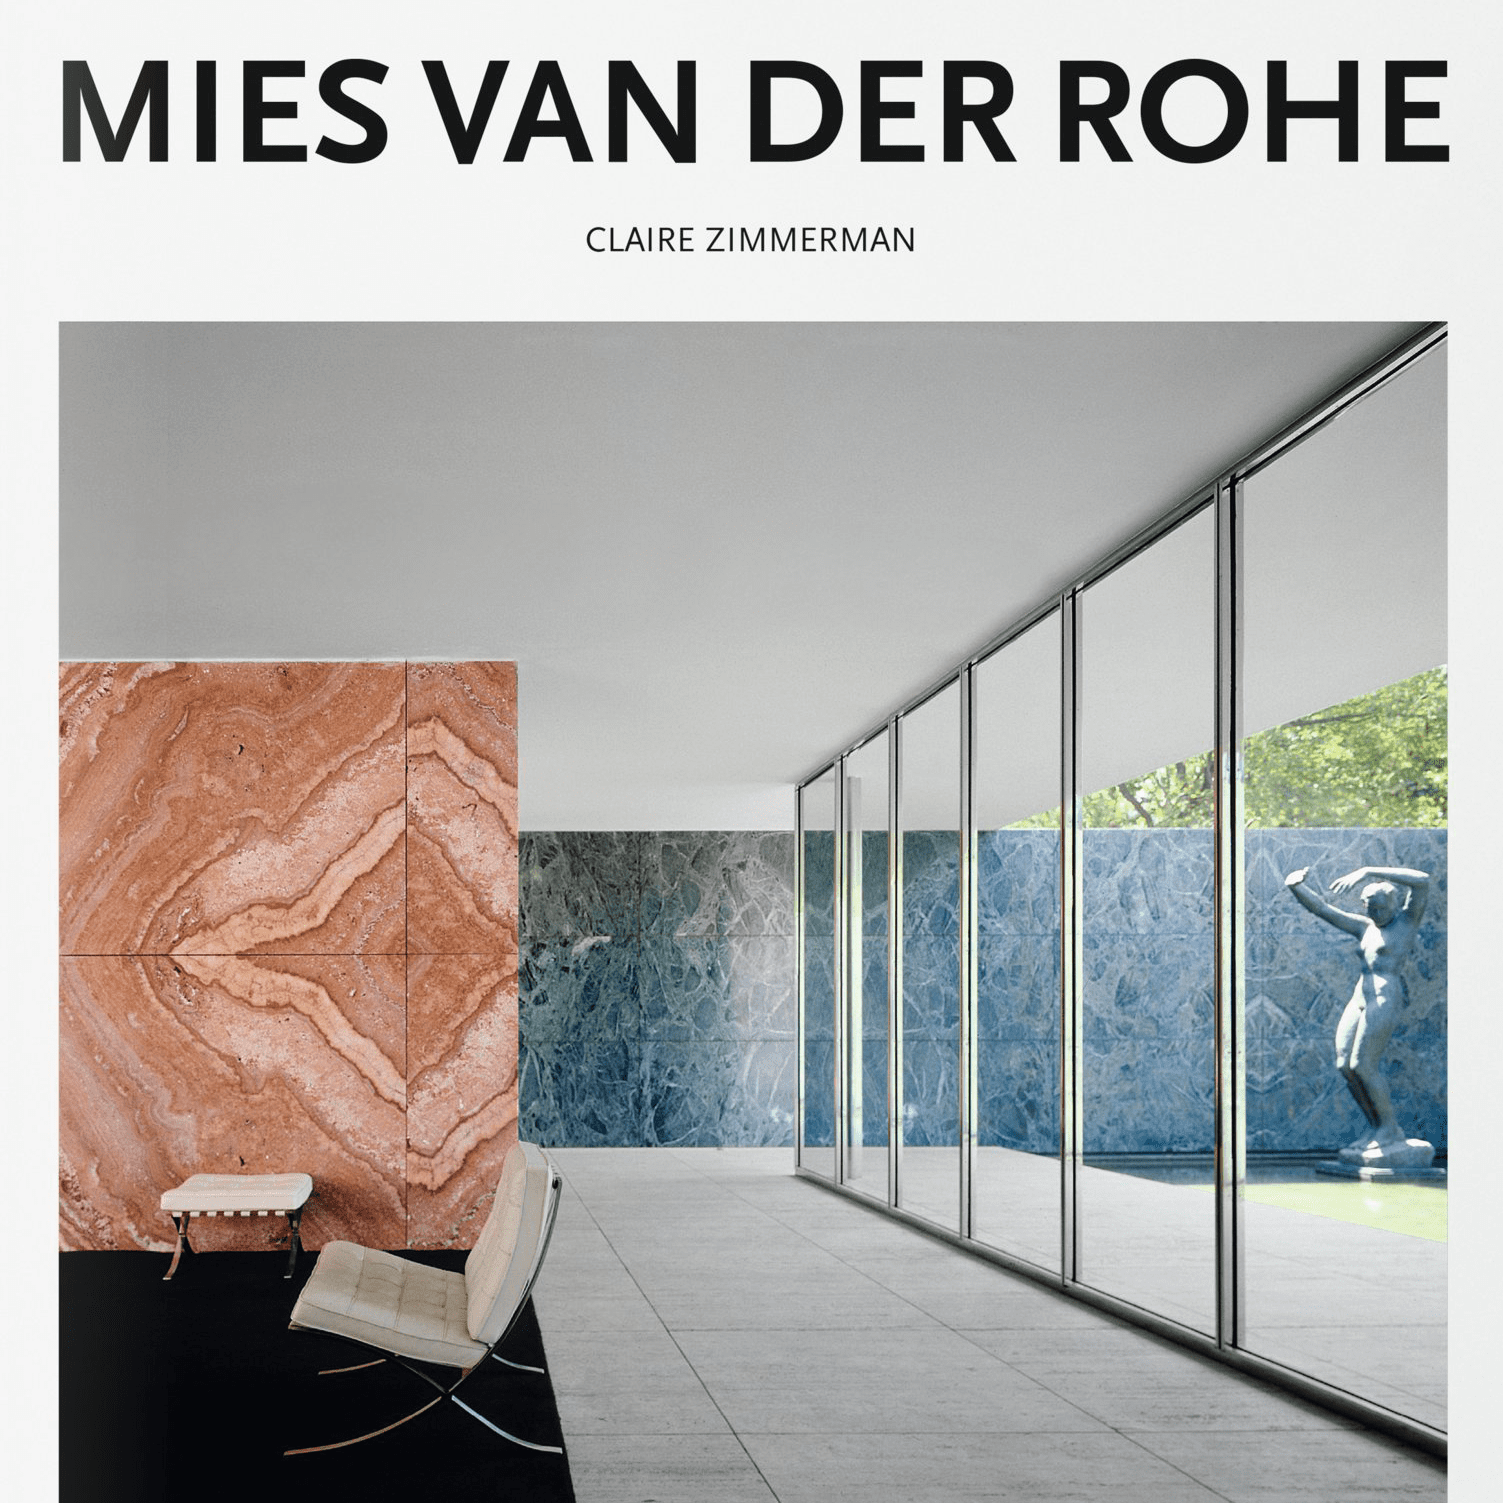 Mies van der Rohe's projects from 1906 to 1967 resmi